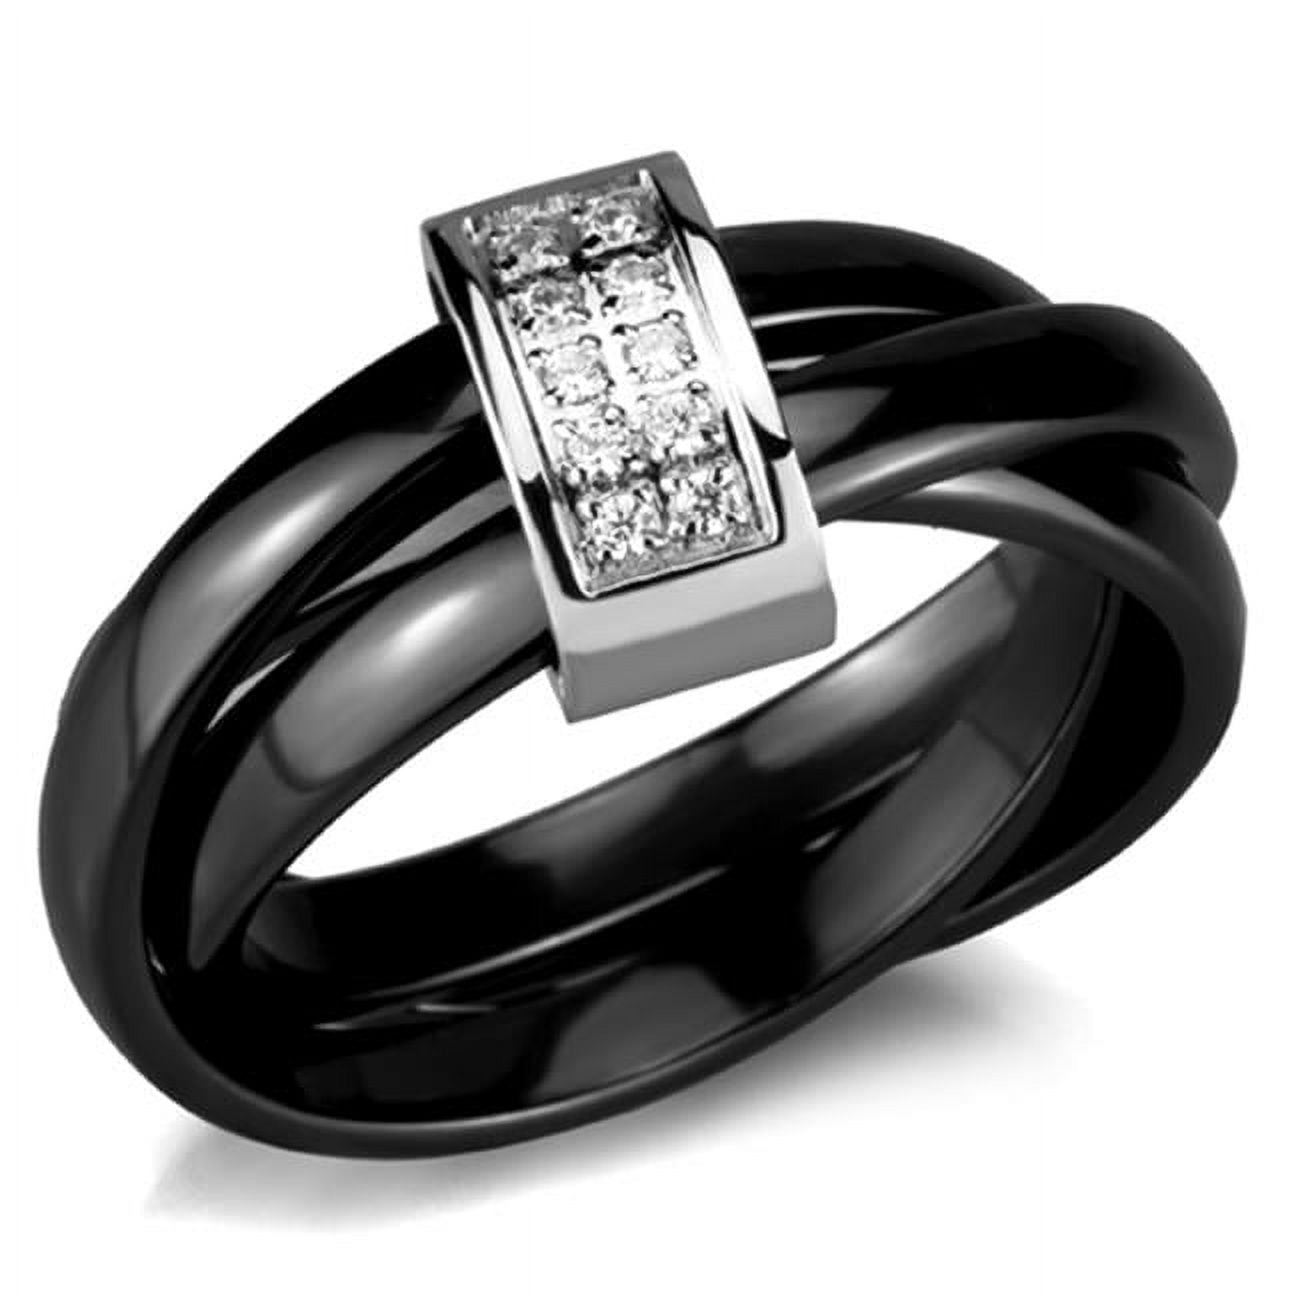 Picture of Alamode 3W950-7 Women High Polished Stainless Steel Ring with Ceramic in Jet - Size 7